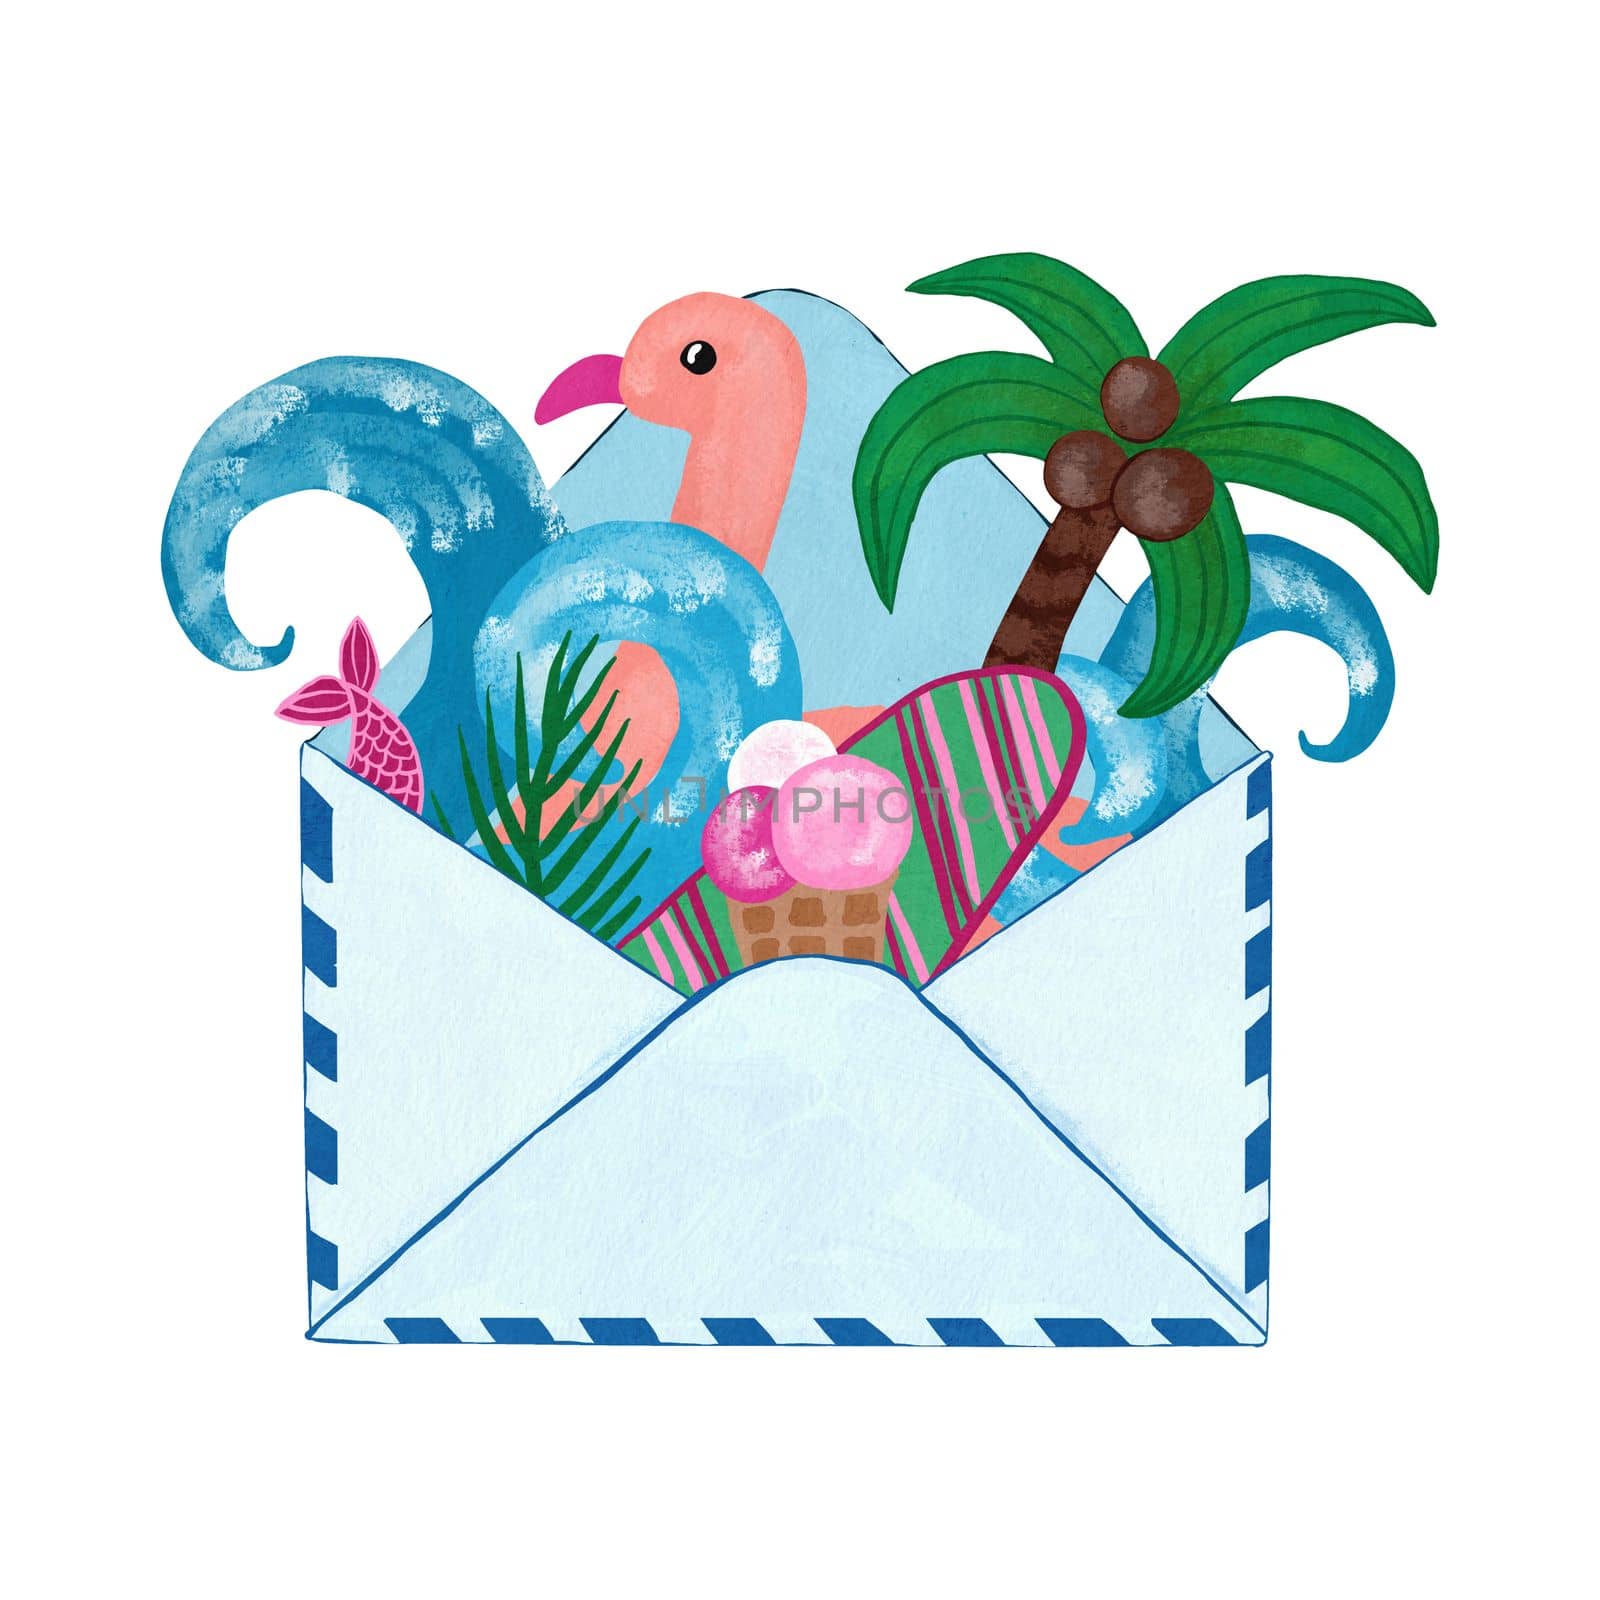 Hand drawn illustration of open letter envelope mailing list, sending business information invitation card. Summer sea ocean vacation tourism, palm blue waves ice cream, flamingo relaxation surf concept. by Lagmar